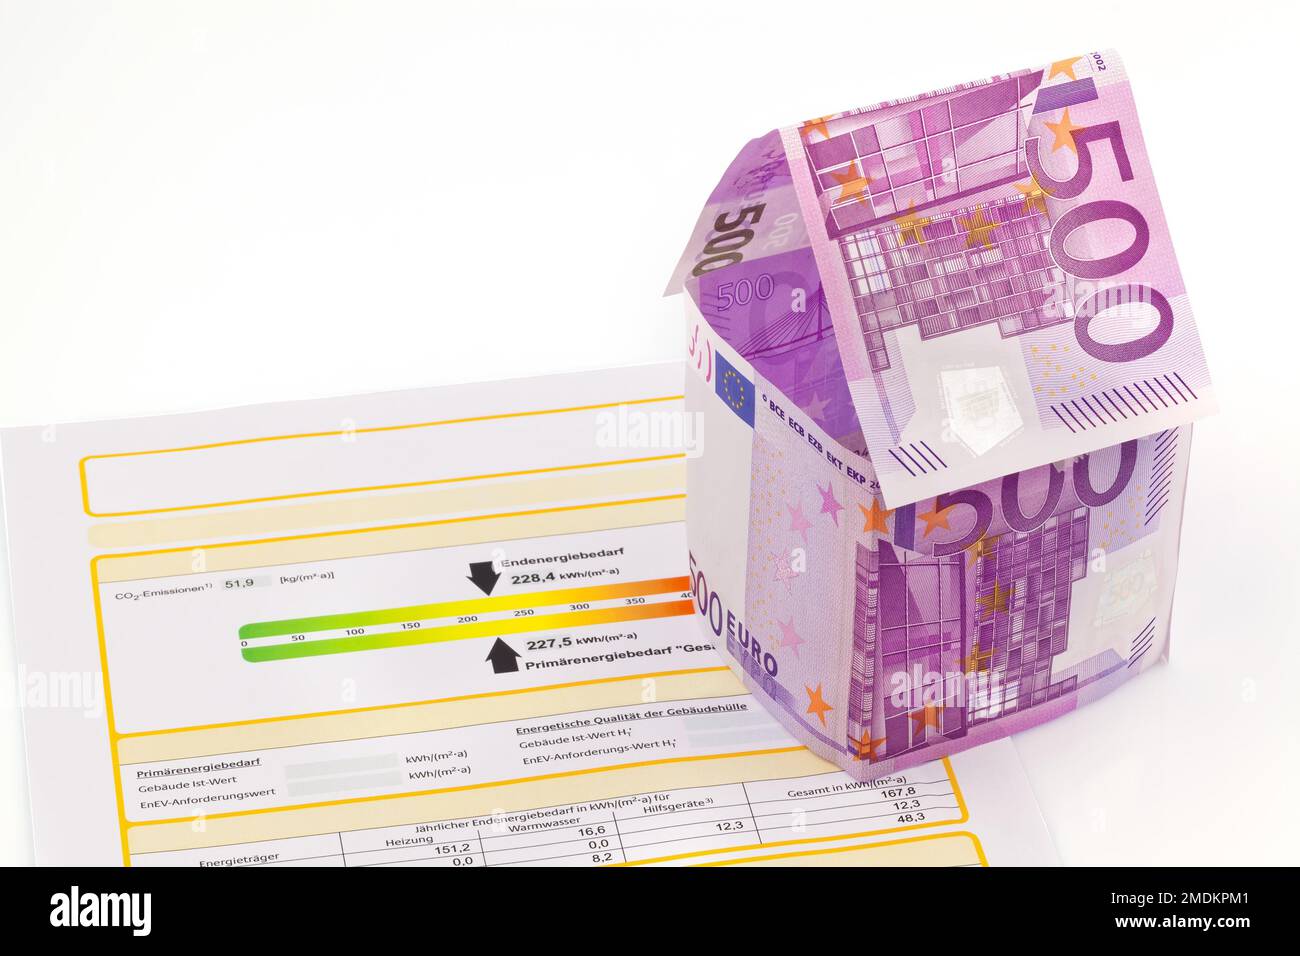 house made of Euro notes and energy certificate, Austria Stock Photo